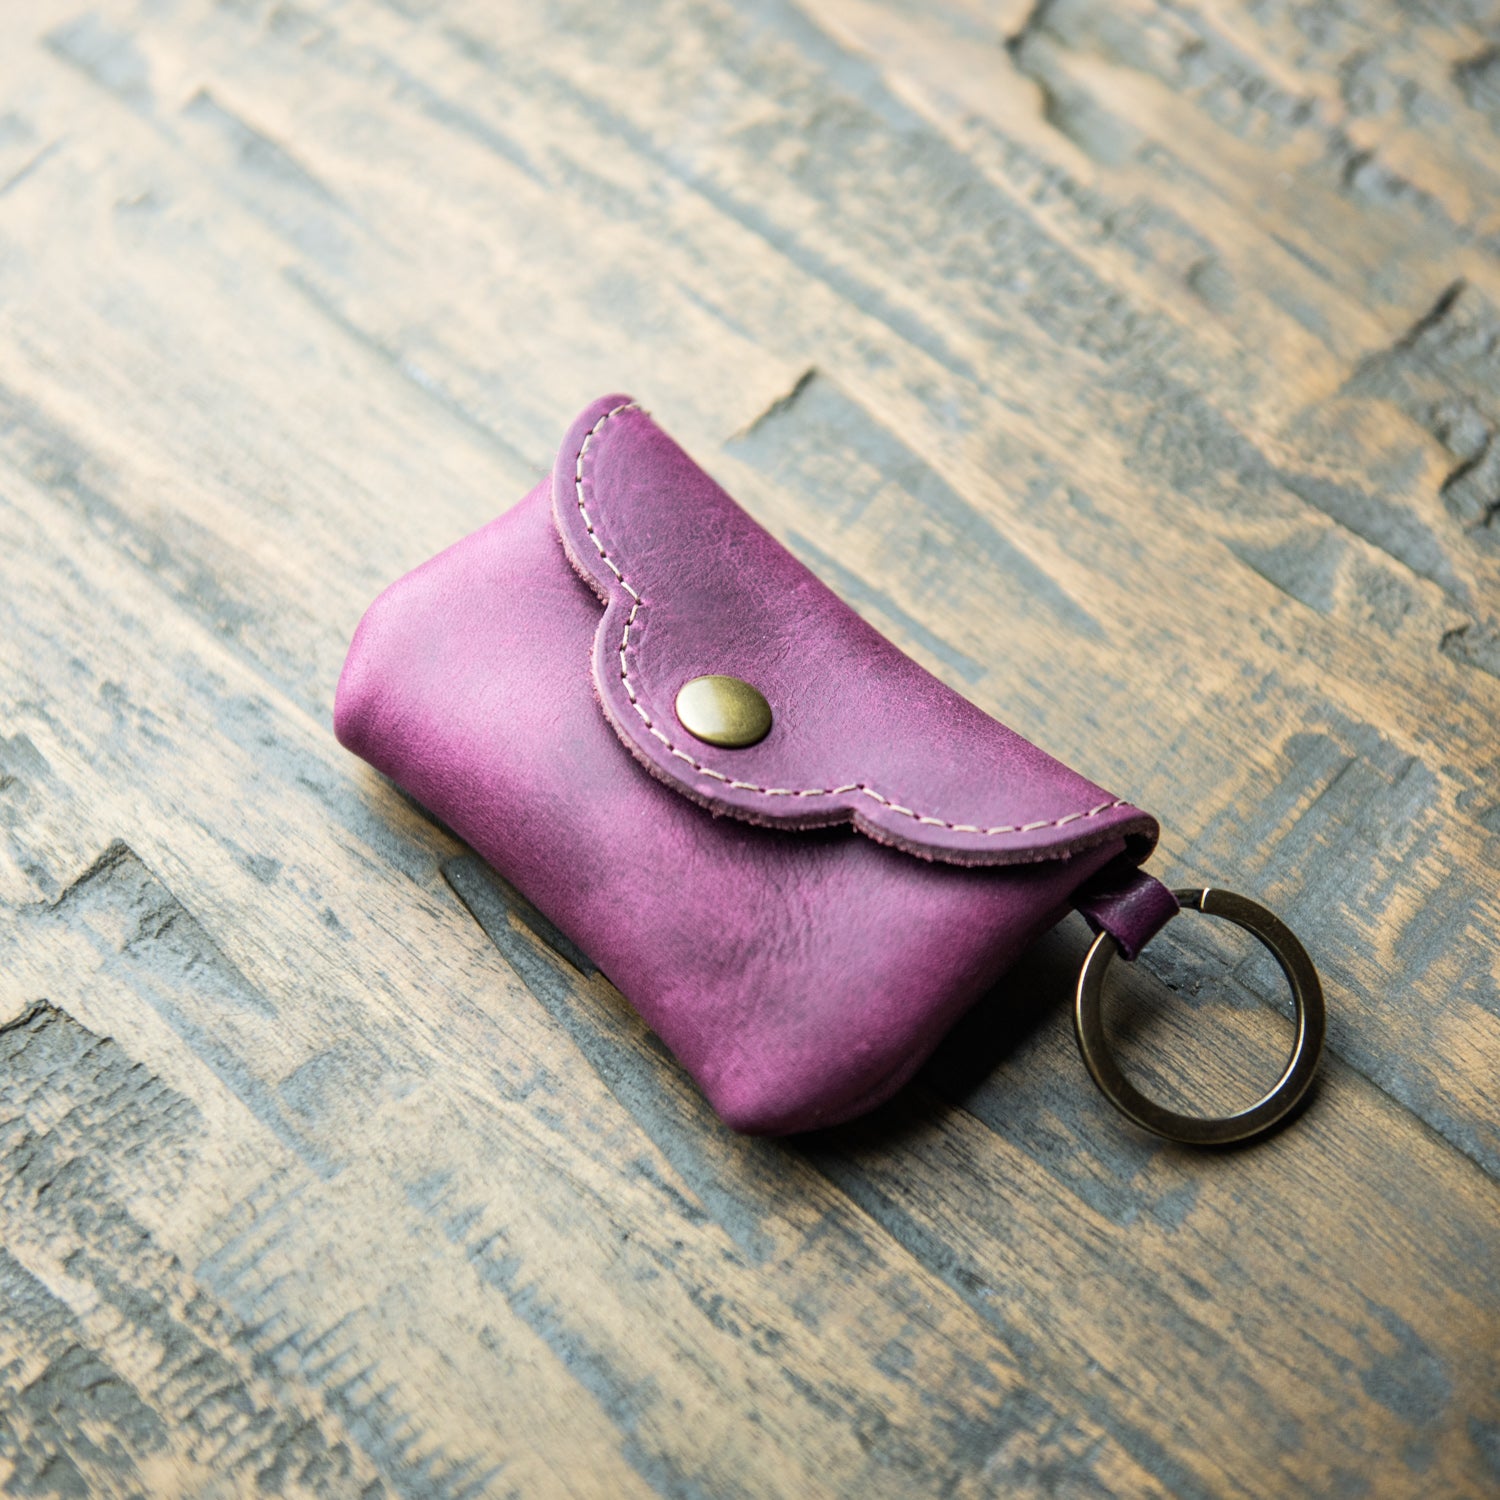 Compact Keychain Wallet in Horween Leather | Hand Made to Order in Houston TX 2 Pockets / 1 Pocket / Keyring / Nickel